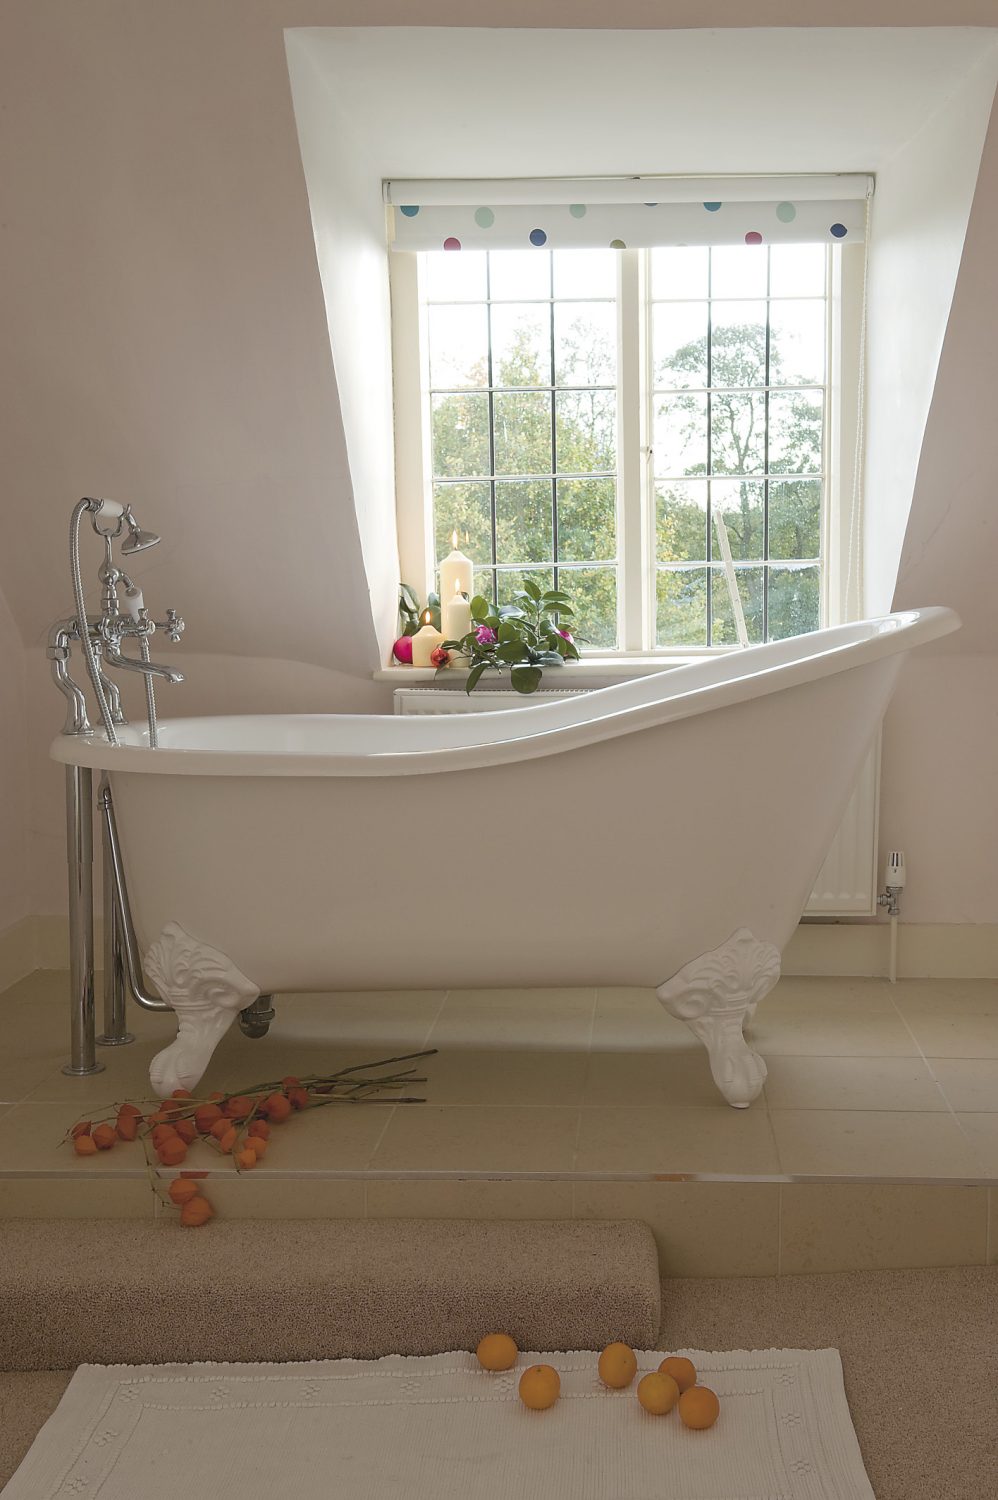 a glorious, free-standing bath sits near a window giving a beautiful view of the garden. Jemima says: “this is the best position for a bath ever – such a wonderful view”...